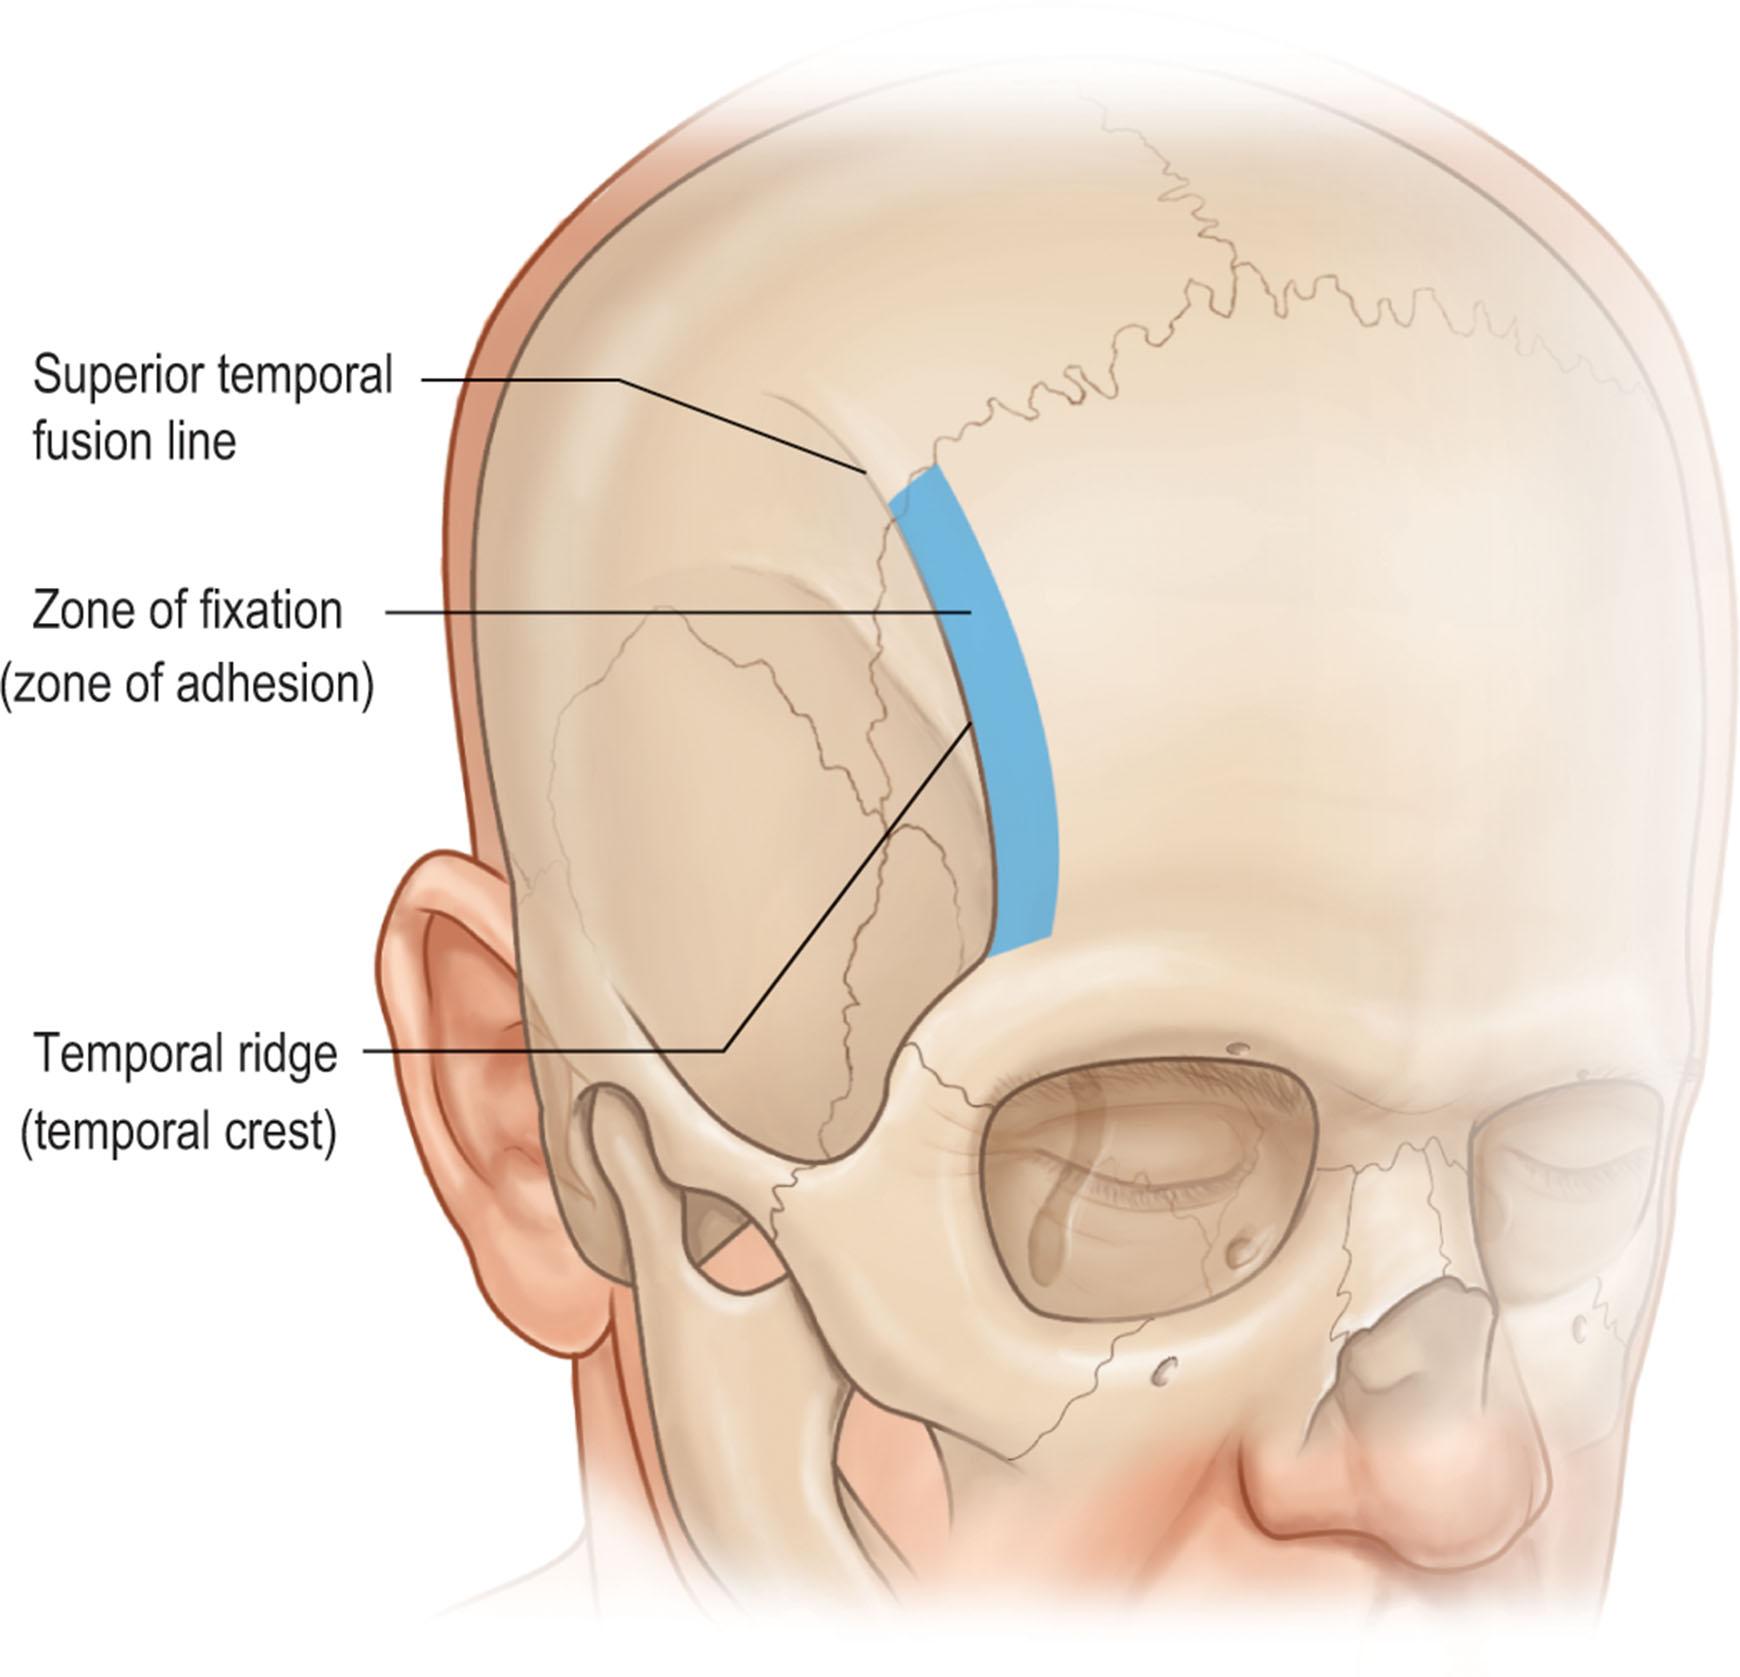 Figure 11.1, Bony anatomy of the forehead and temporal fossa. The palpable temporal ridge separates the temporal fossa from the forehead. The zone of fixation (also called zone of adhesion, superior temporal septum) is a 5-mm-wide band along the temporal ridge where all layers are bound down to periosteum.